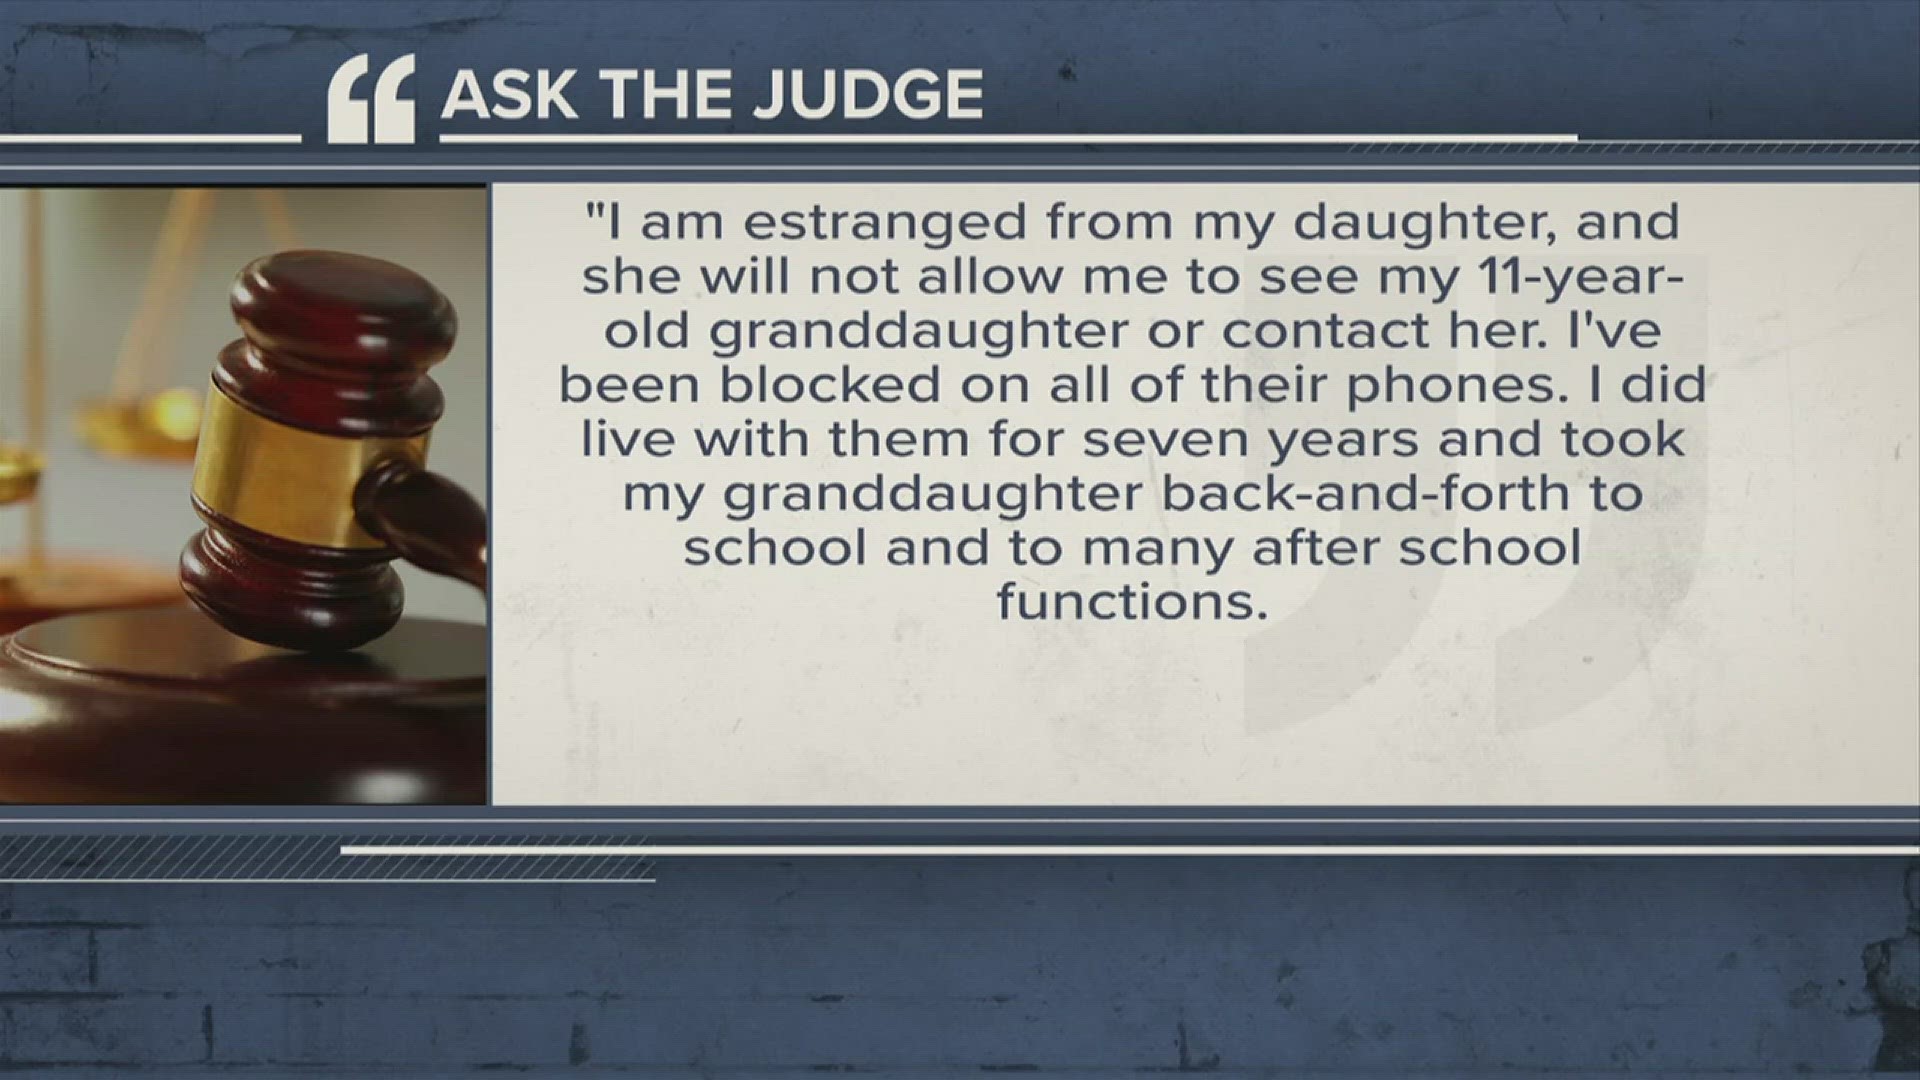 Watch "Ask the Judge" Wednesdays on 12News at 5 p.m. Submit your questions at 12NewsNow.com/AskTheJudge